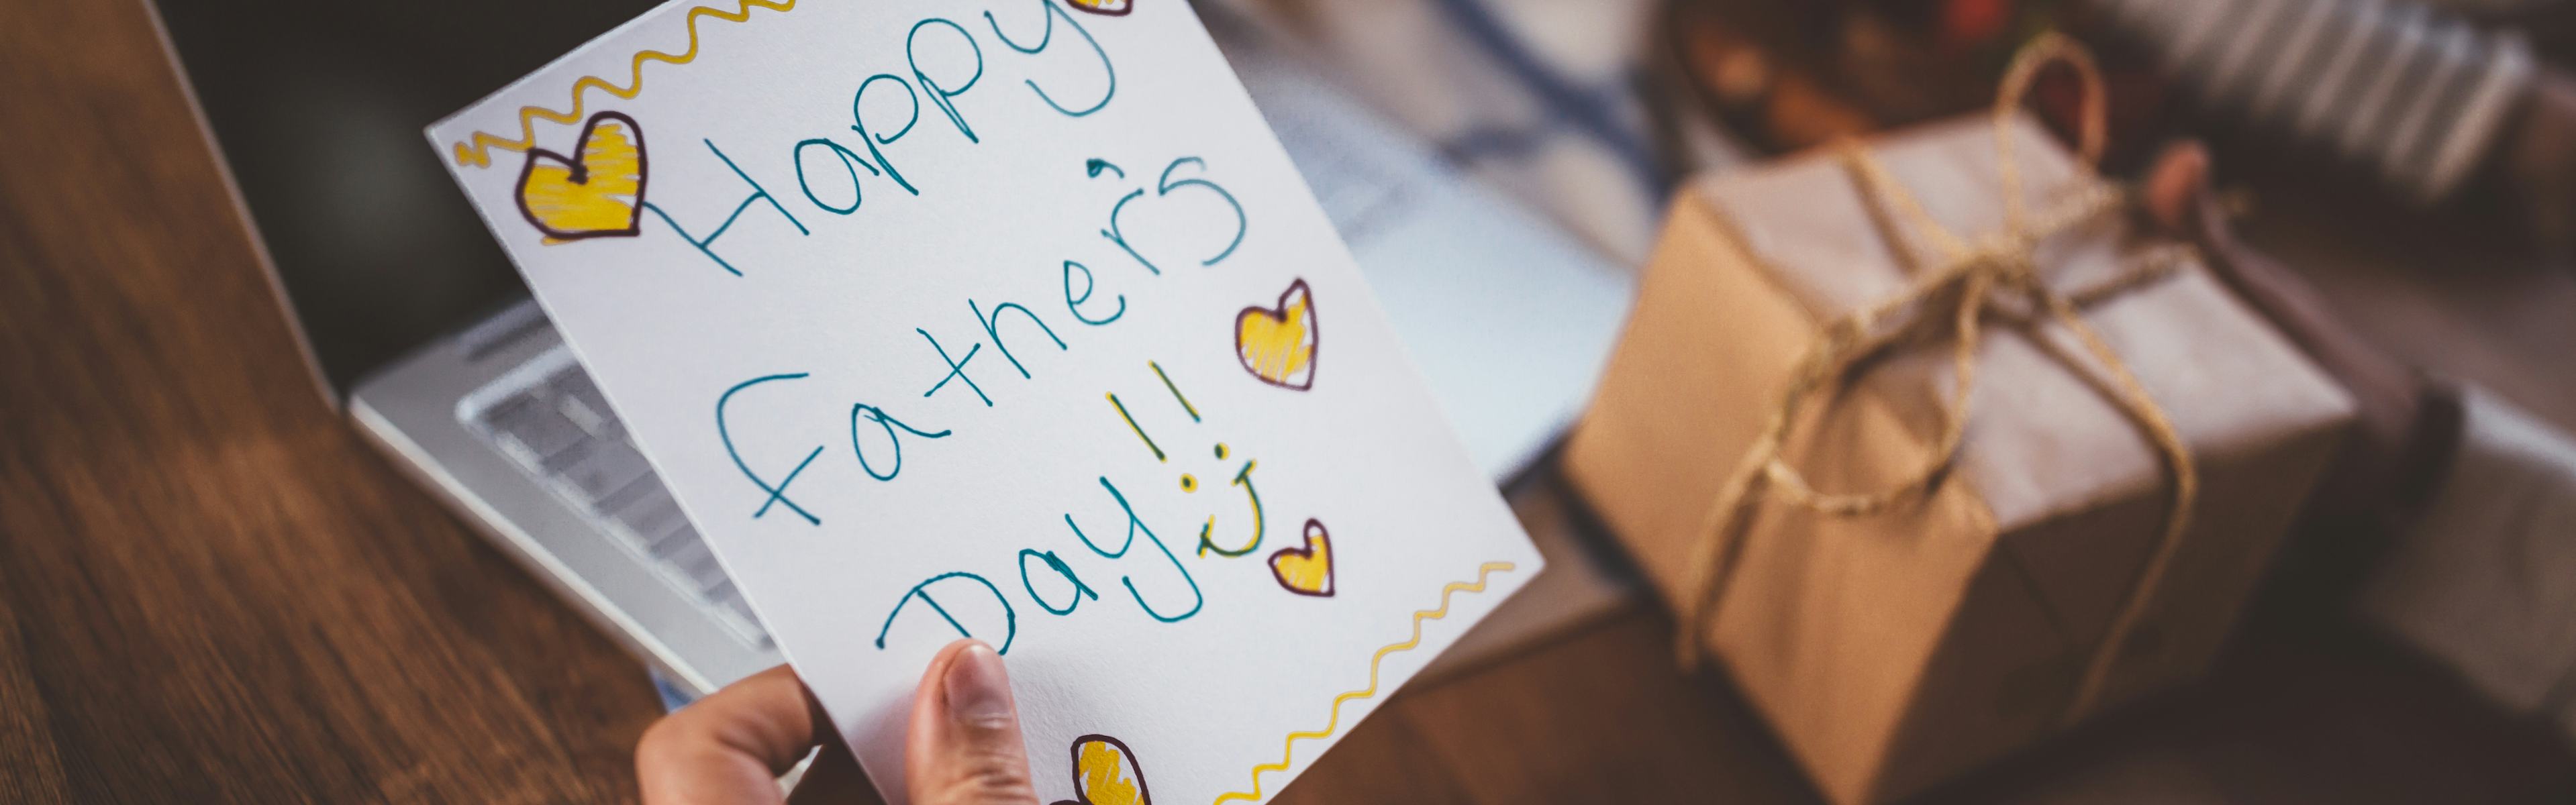 Hand written father's day card being held in front of a table with laptop and wrapped present on it